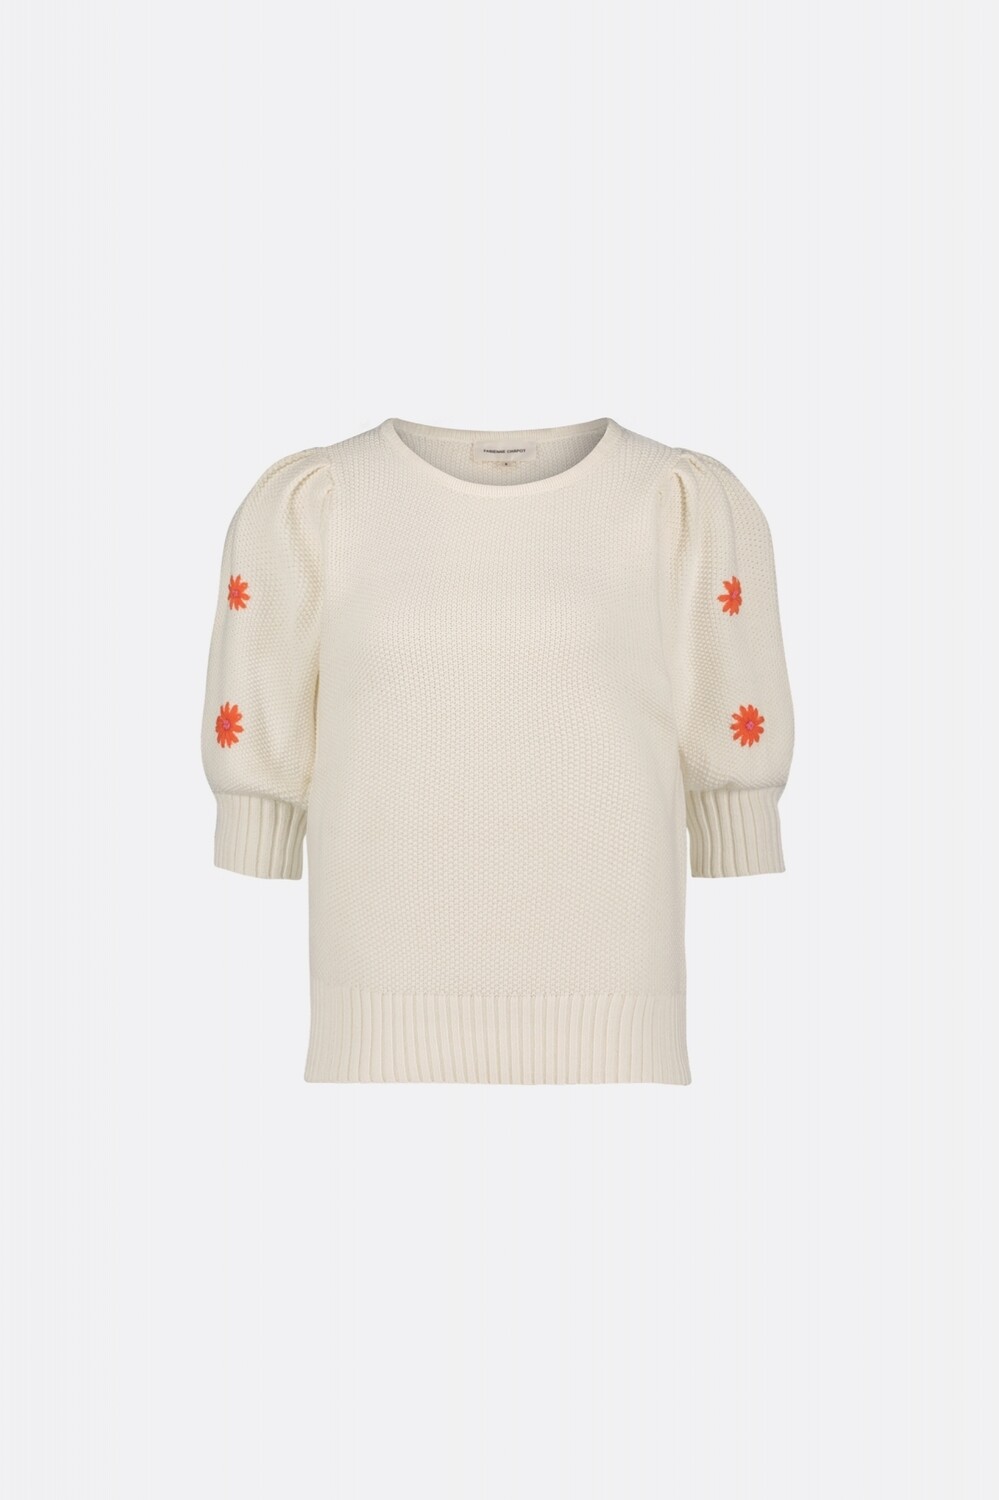 Fabienne Chapot rice pullover off white